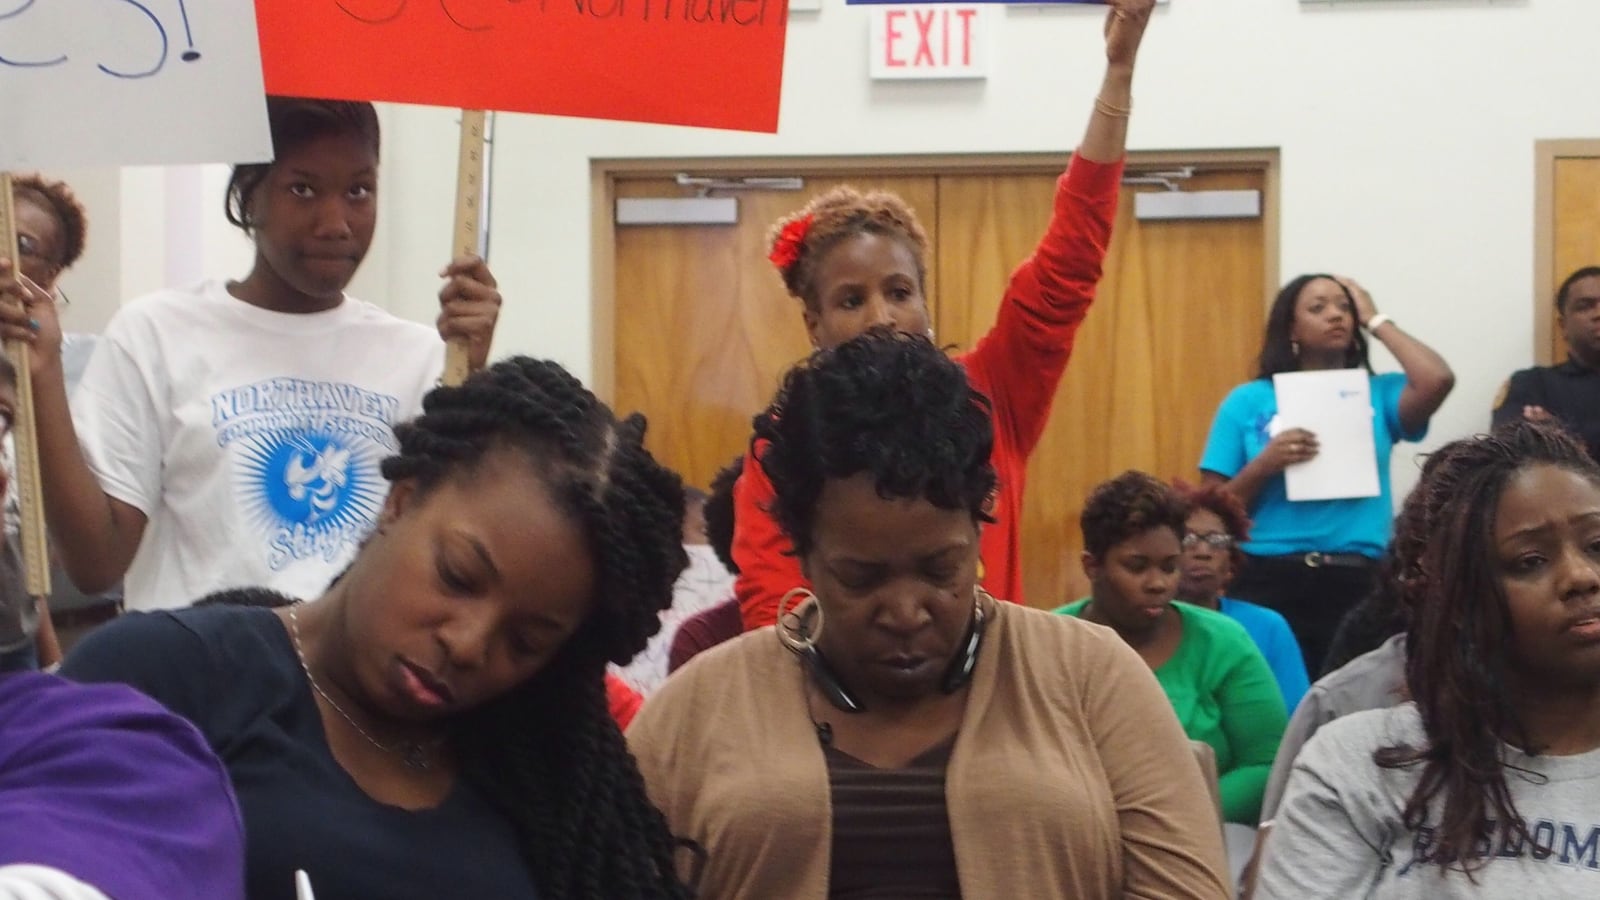 Students protest a plan to close some schools and transfer students from others within Shelby County Schools.